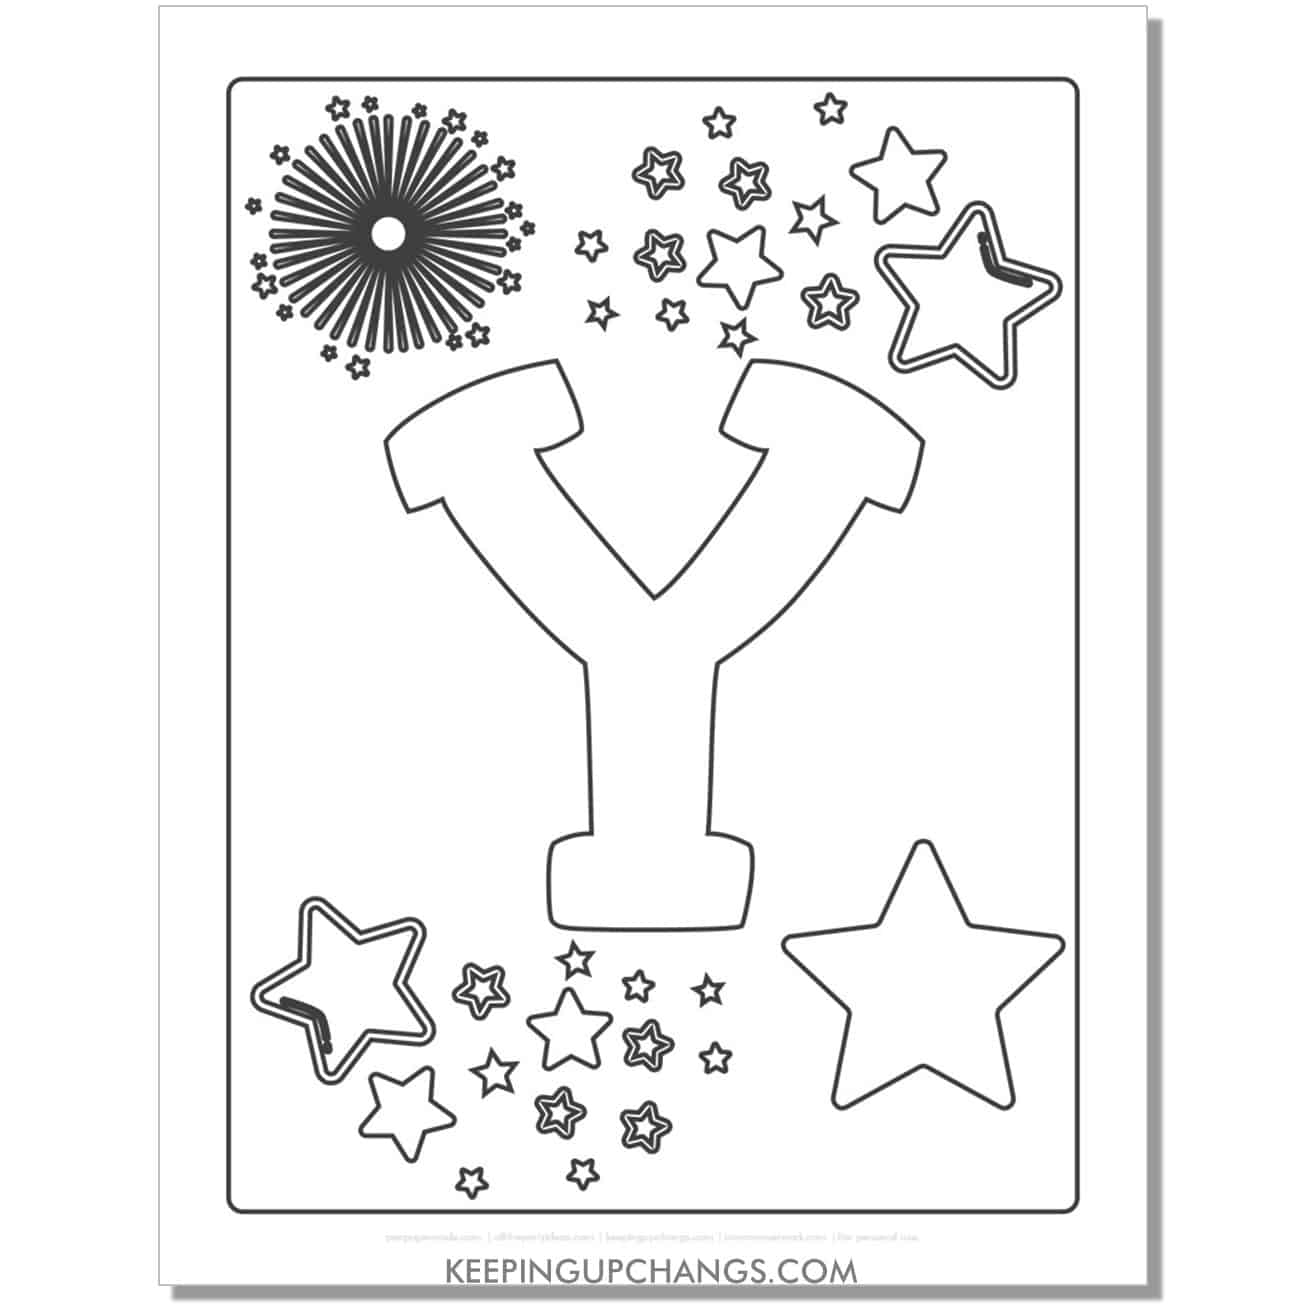 cool letter y to color with stars, space theme.